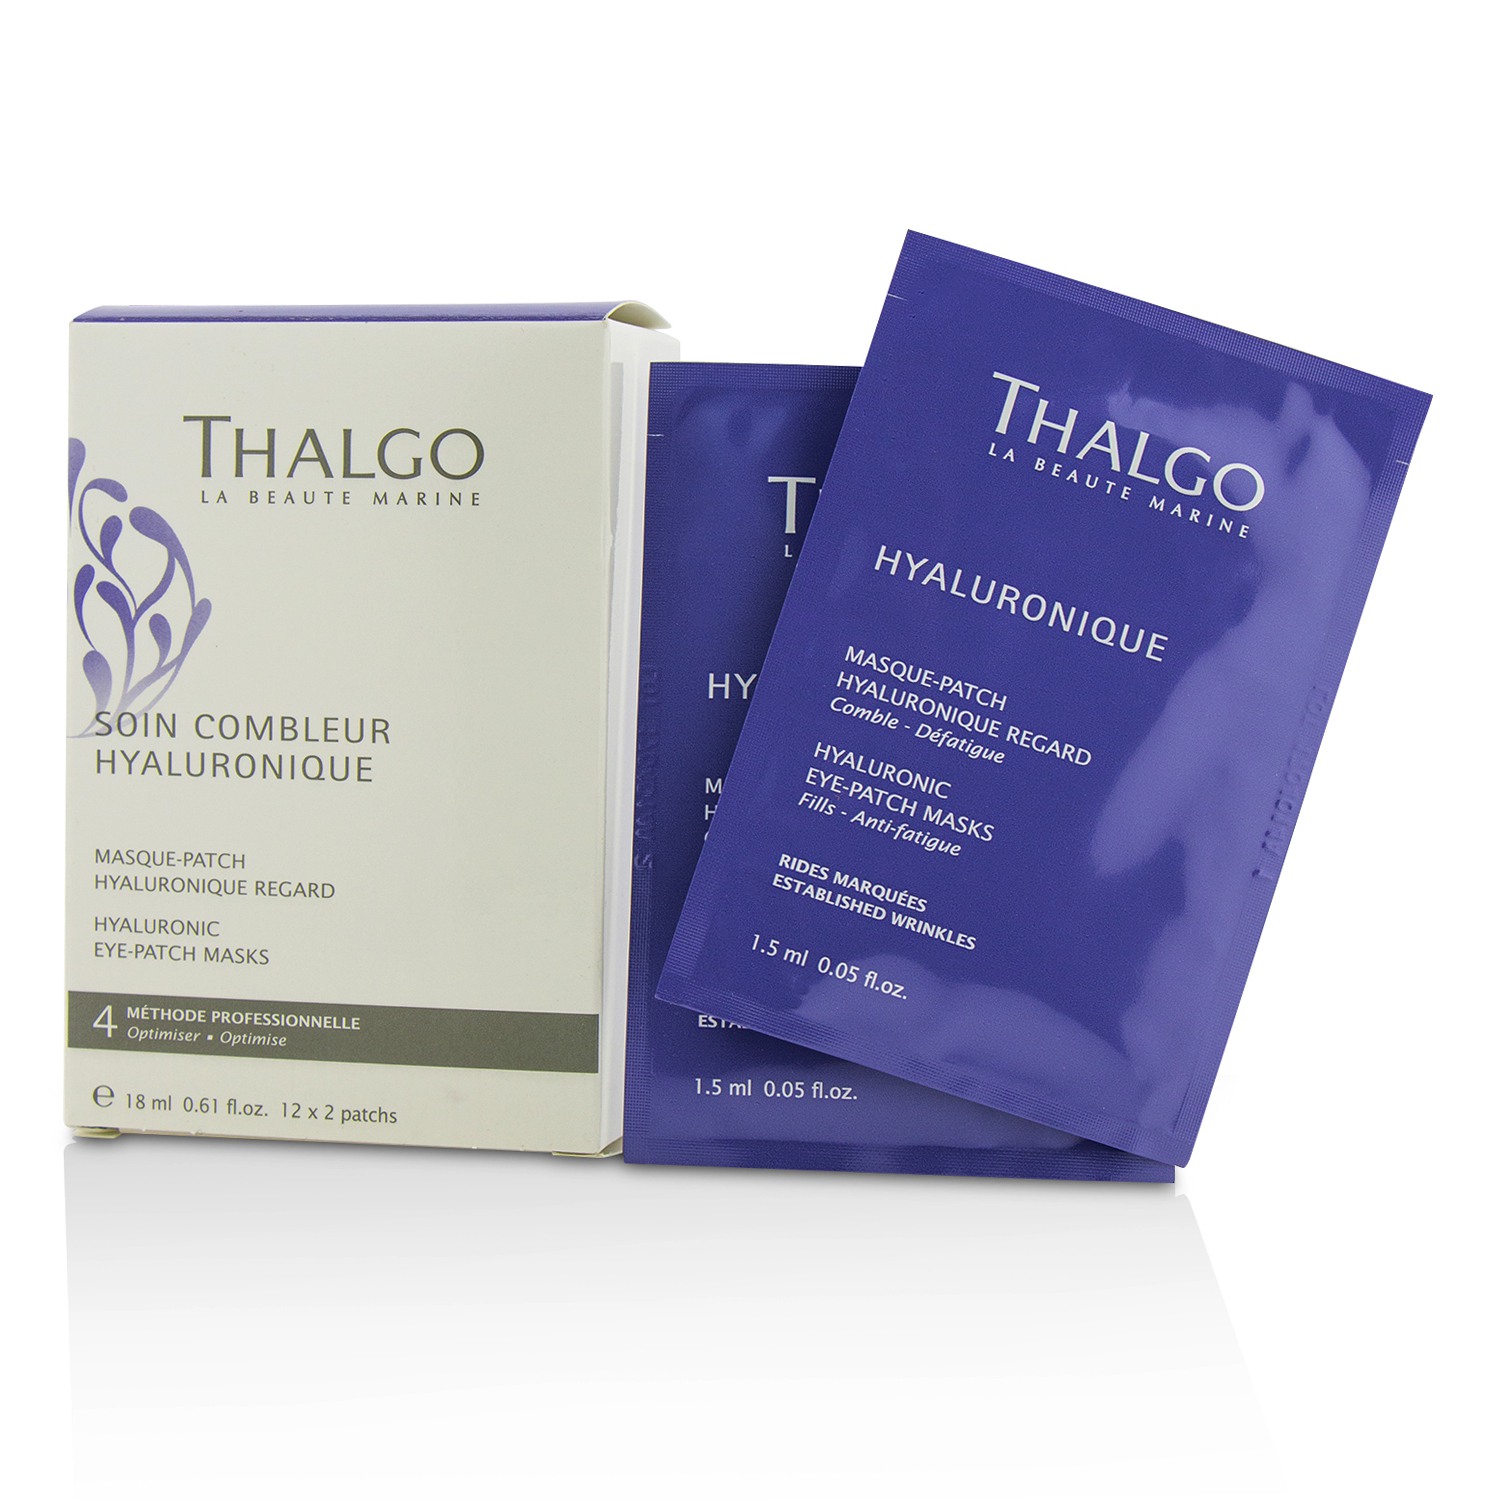 Hyaluronique Hyaluronic Eye-Patch Masks (Salon Size) Thalgo Image